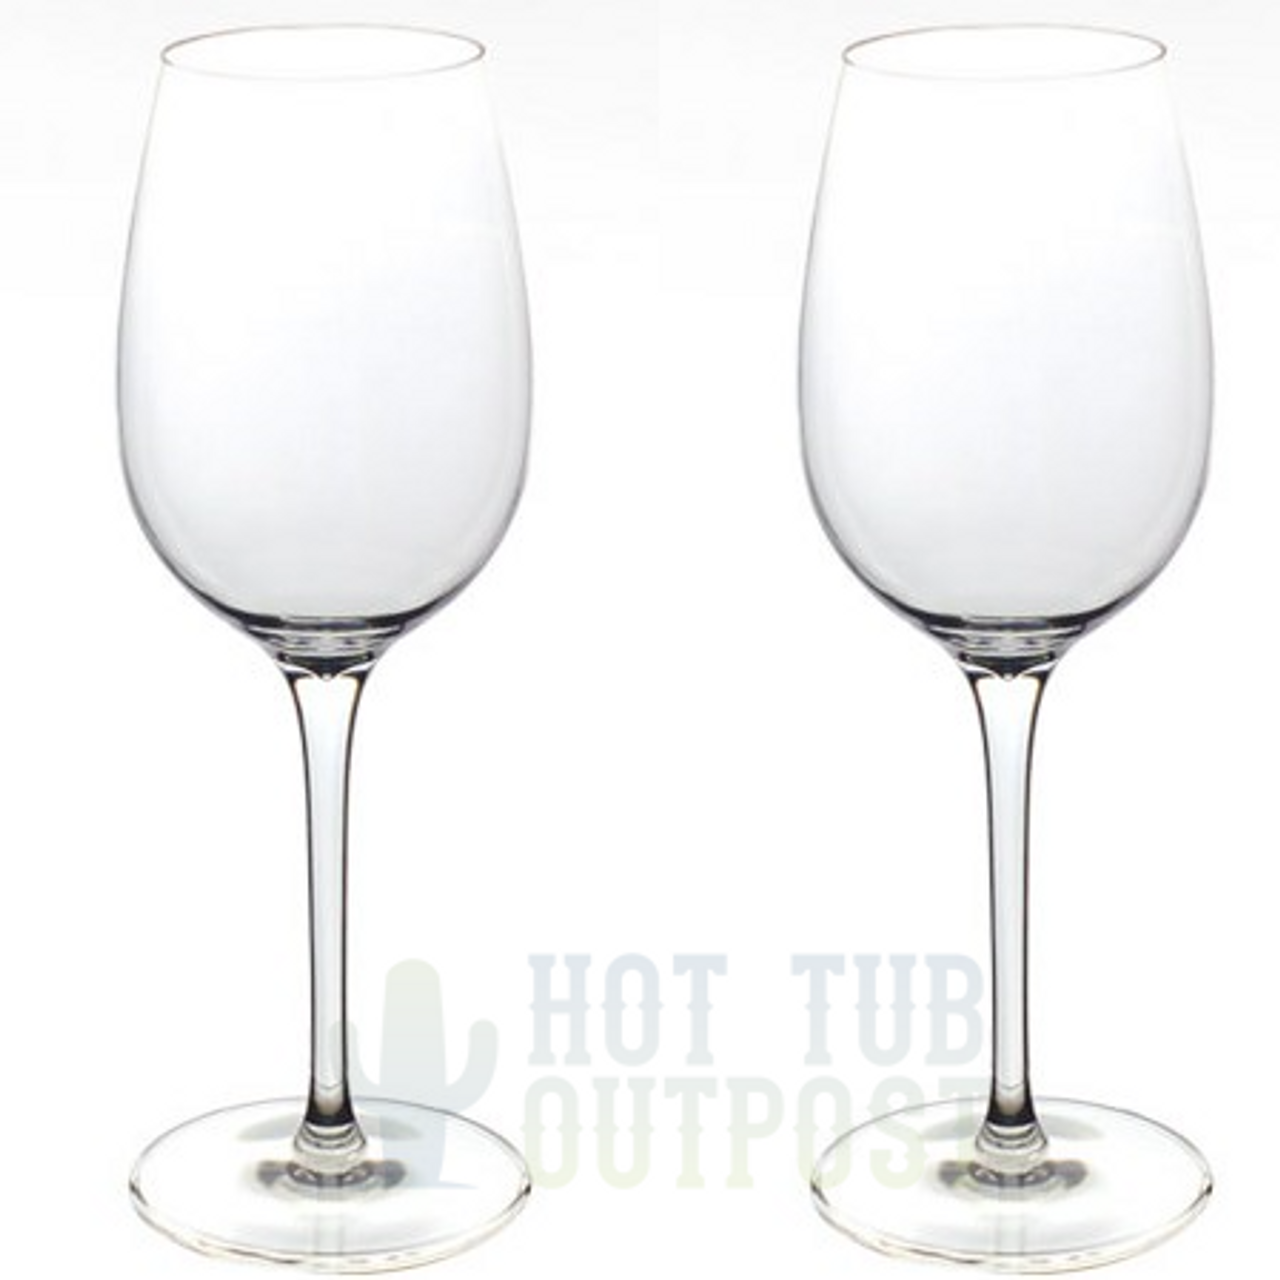 https://cdn11.bigcommerce.com/s-j995xu1/images/stencil/1280x1280/products/13863/20961/wine-glasses__78257.1543970682.png?c=2?imbypass=on